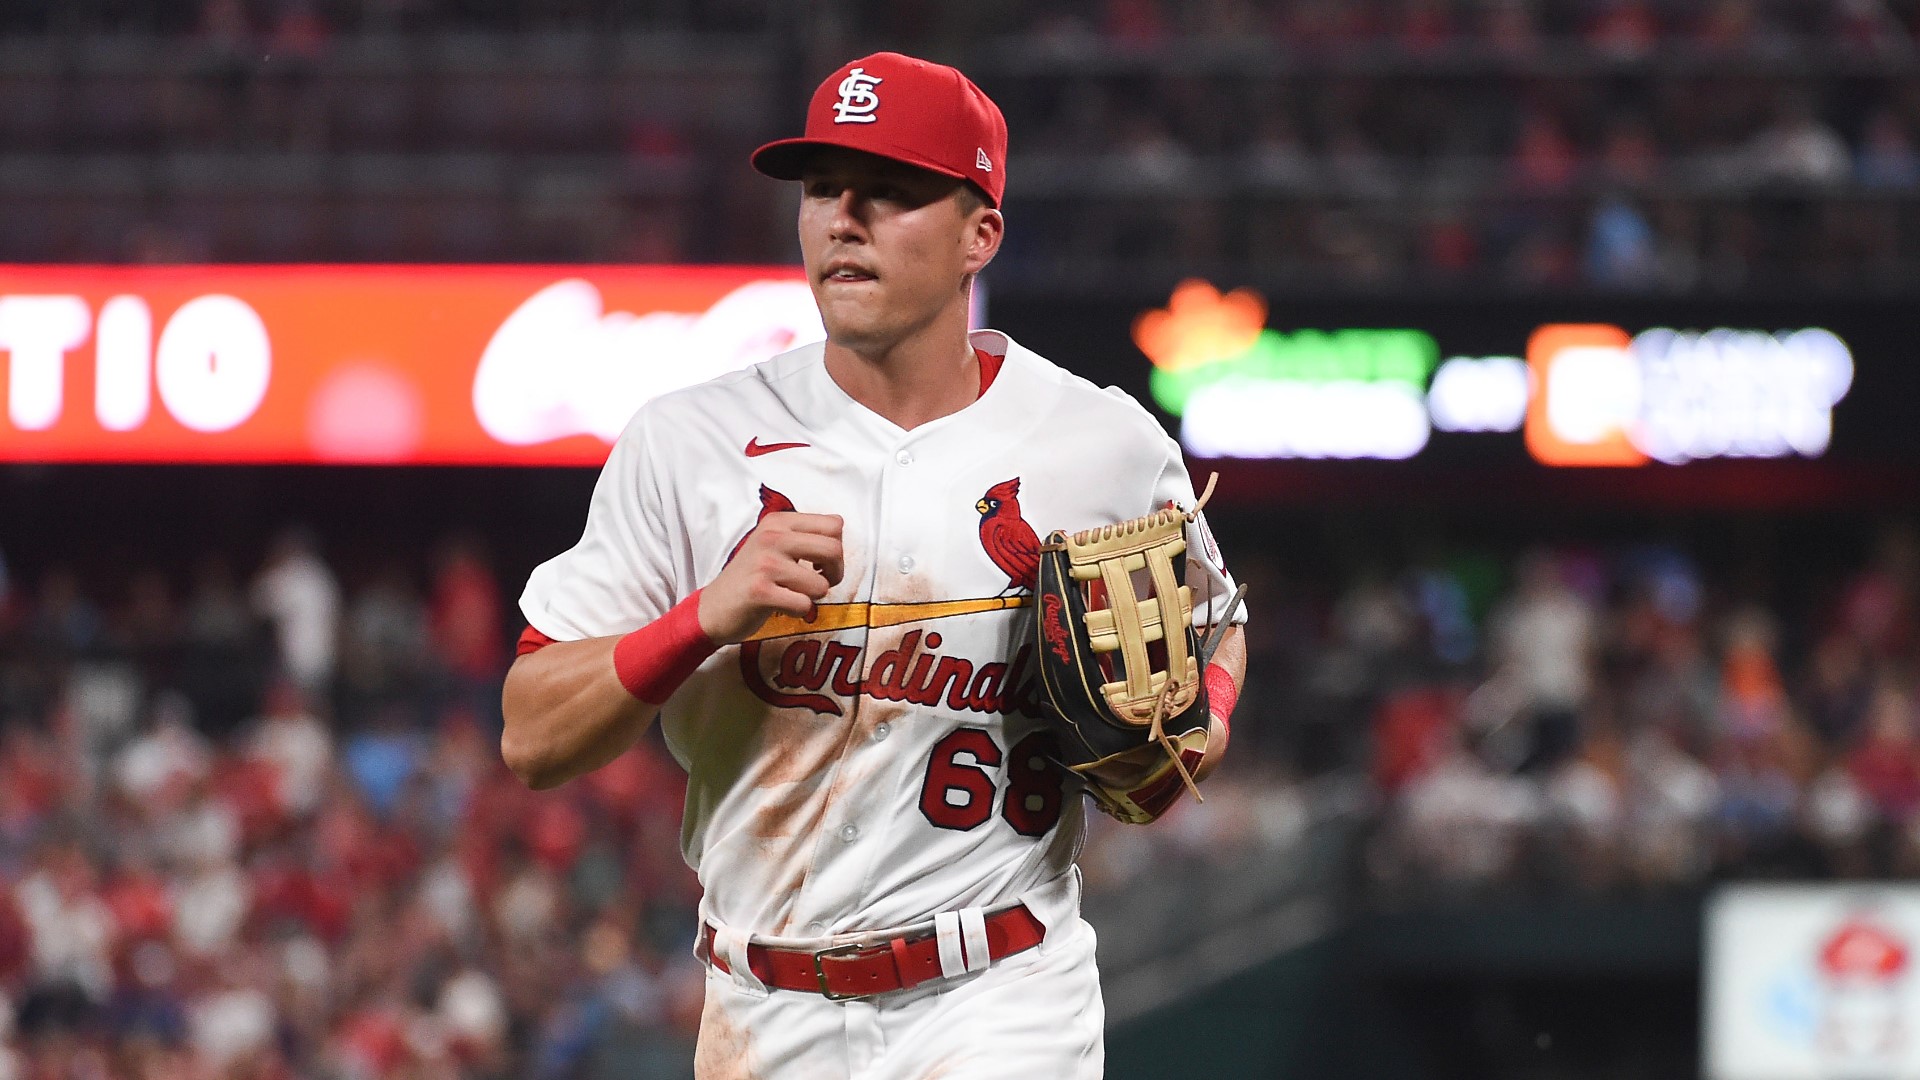 St. Louis Cardinals player Lars Nootbaar is a hot pick to have a breakout year. What's his mindset coming into this year and why's he always flashing that big grin?